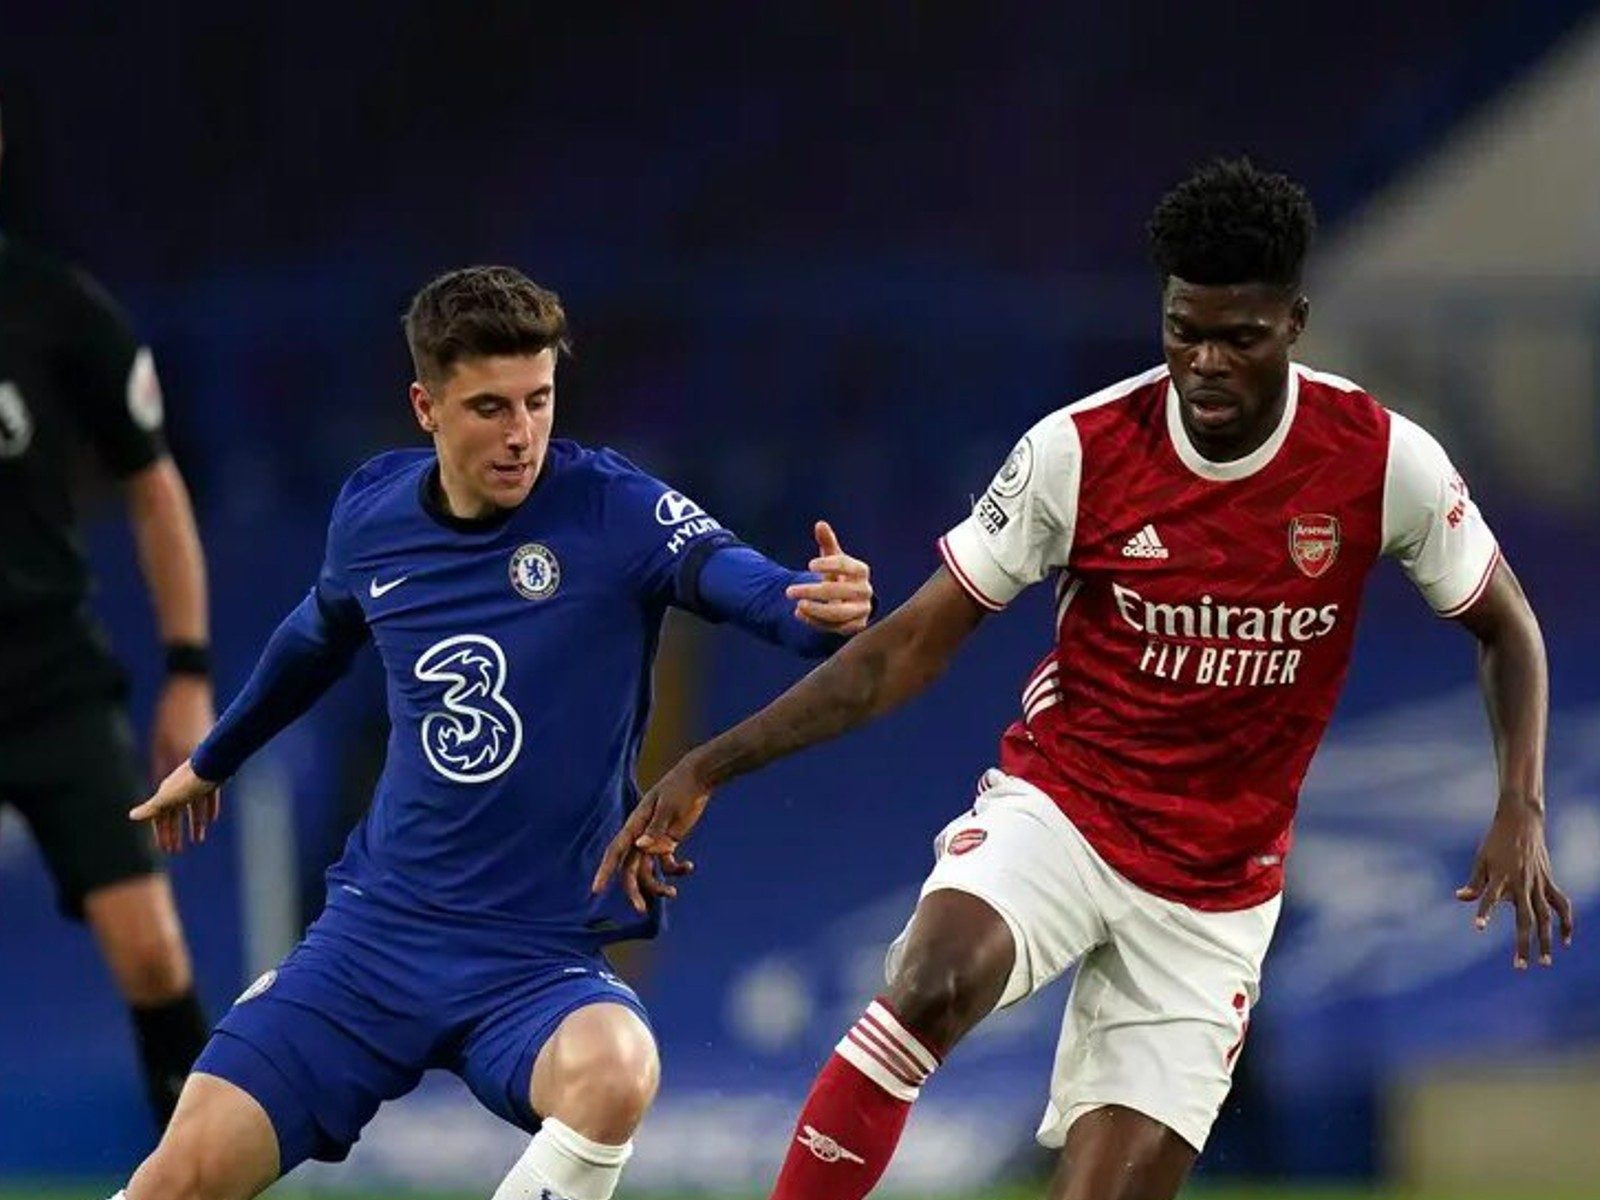 Chelsea vs Arsenal Live Streaming When and Where to Watch EPL 2021-22 Live Coverage on Live TV Online